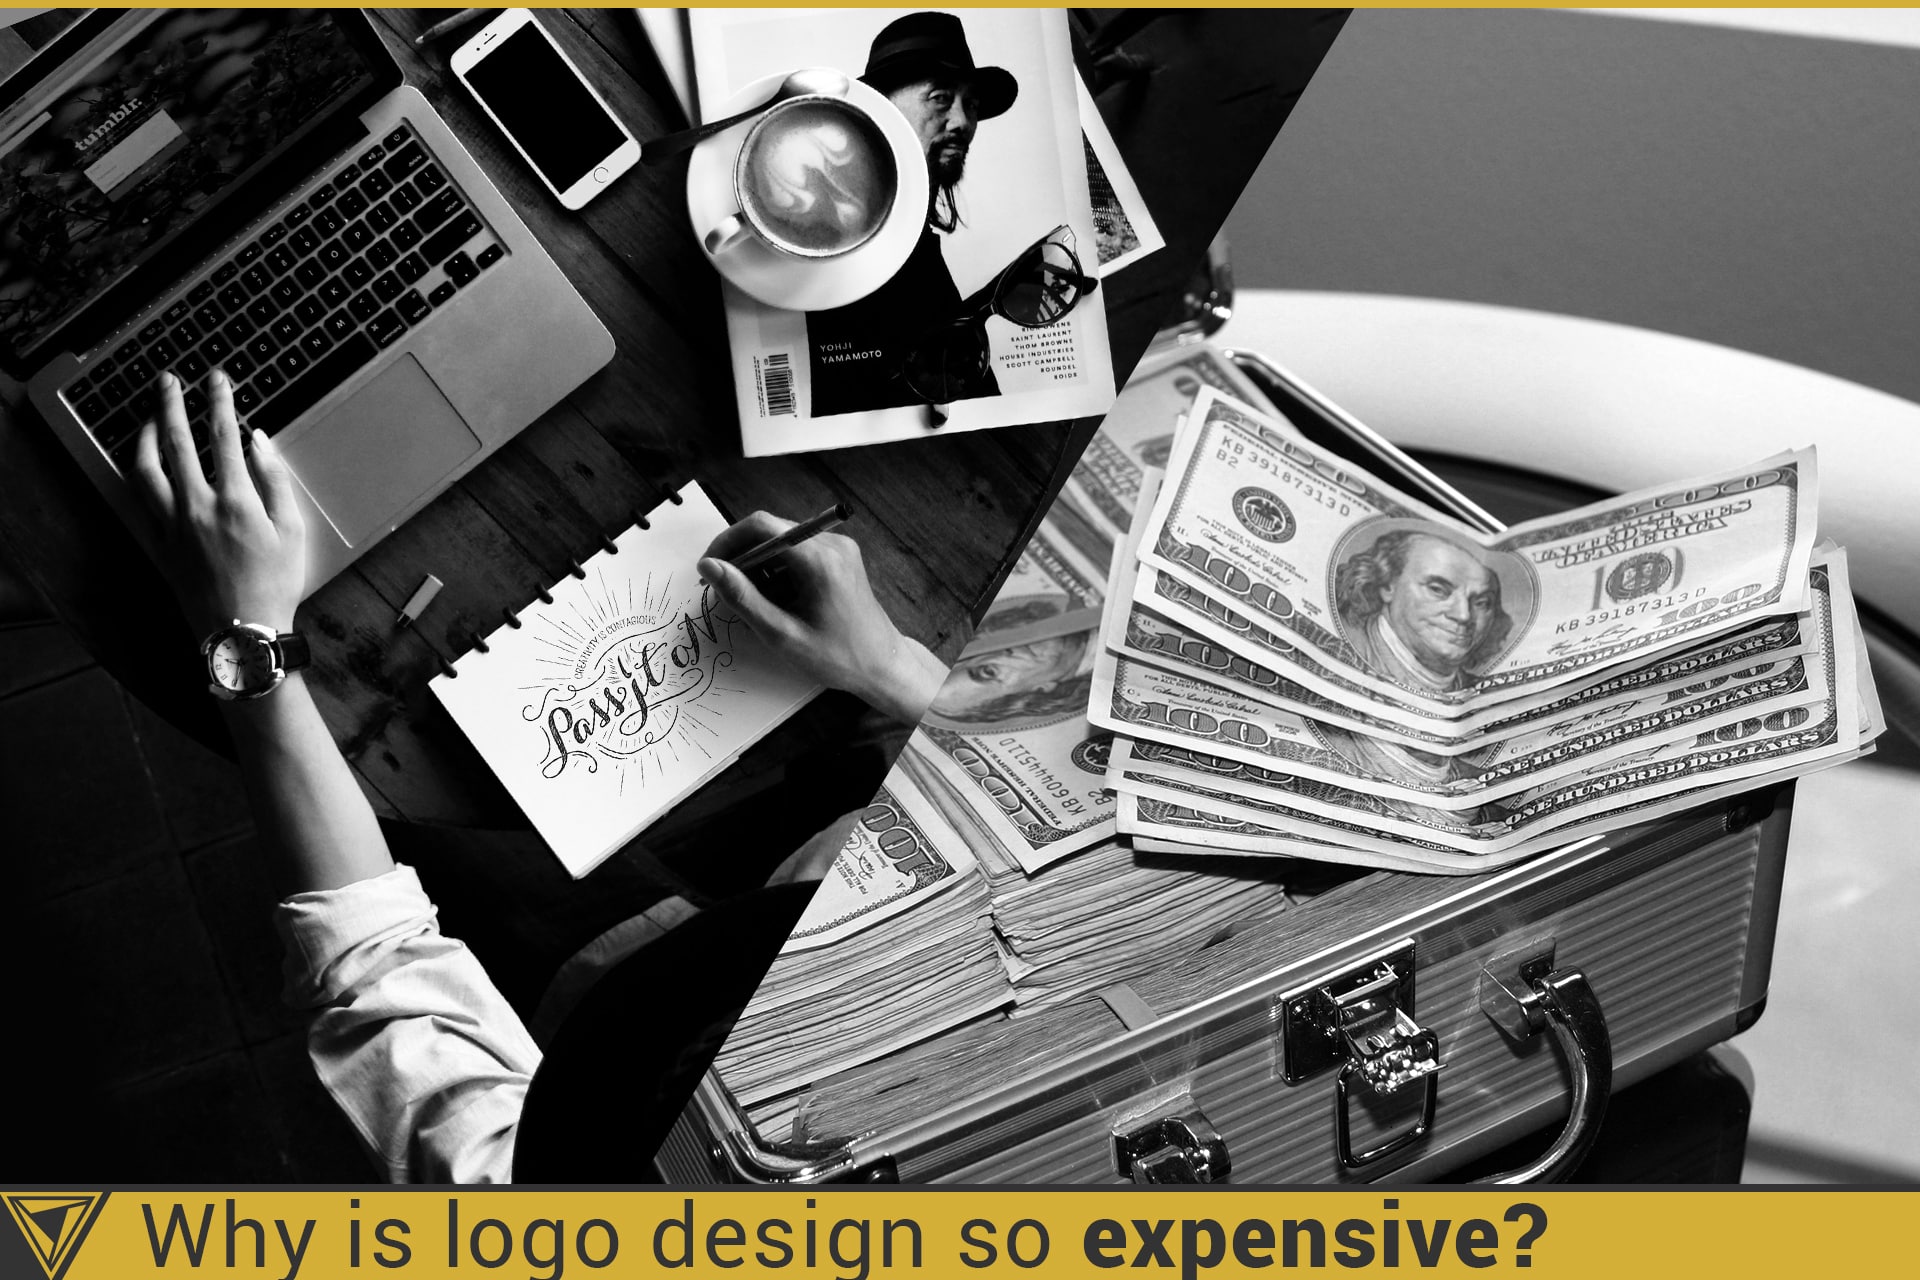 Why is logo design so expensive?